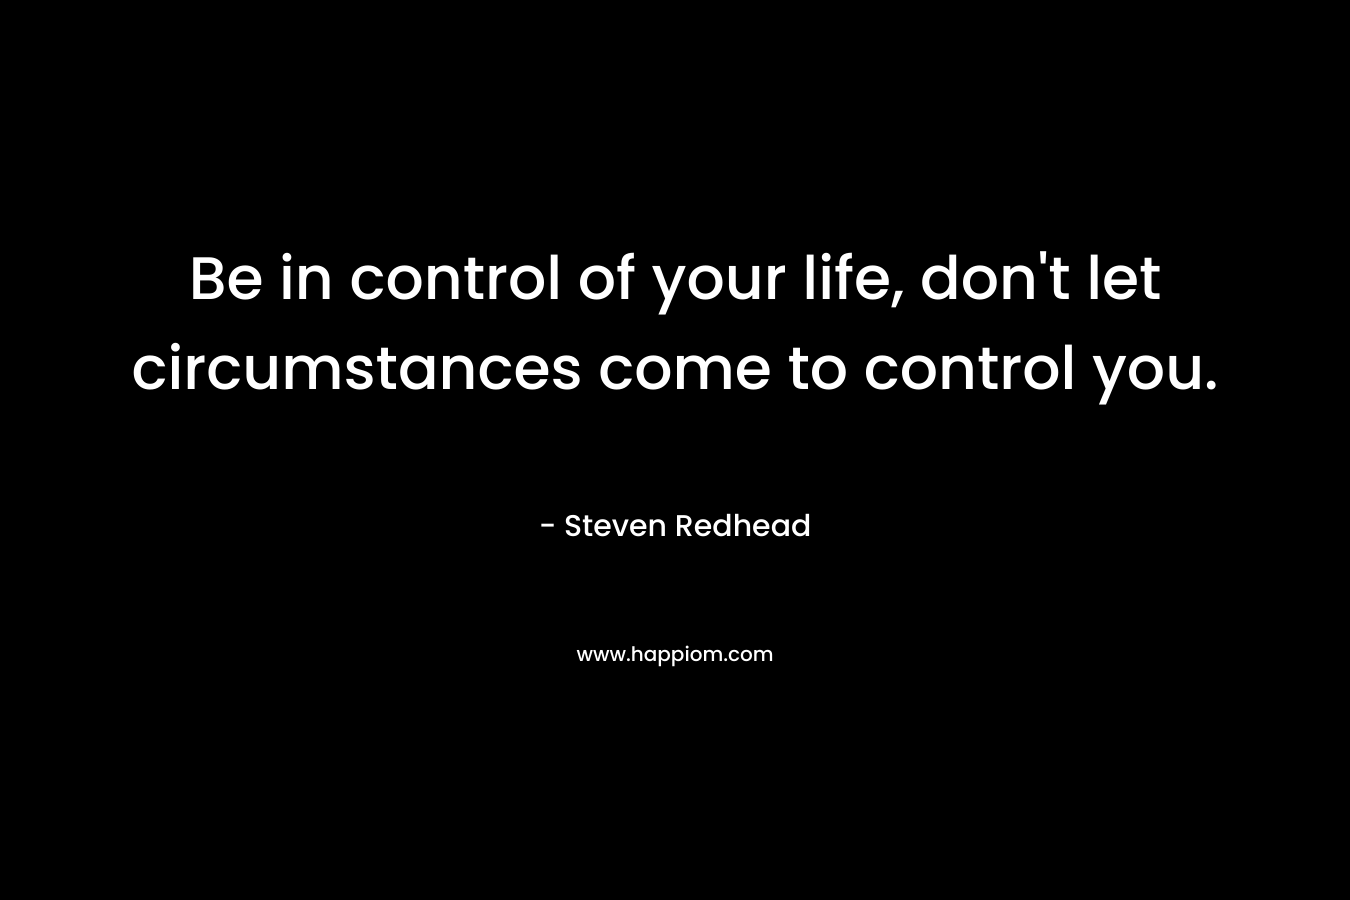 Be in control of your life, don't let circumstances come to control you.